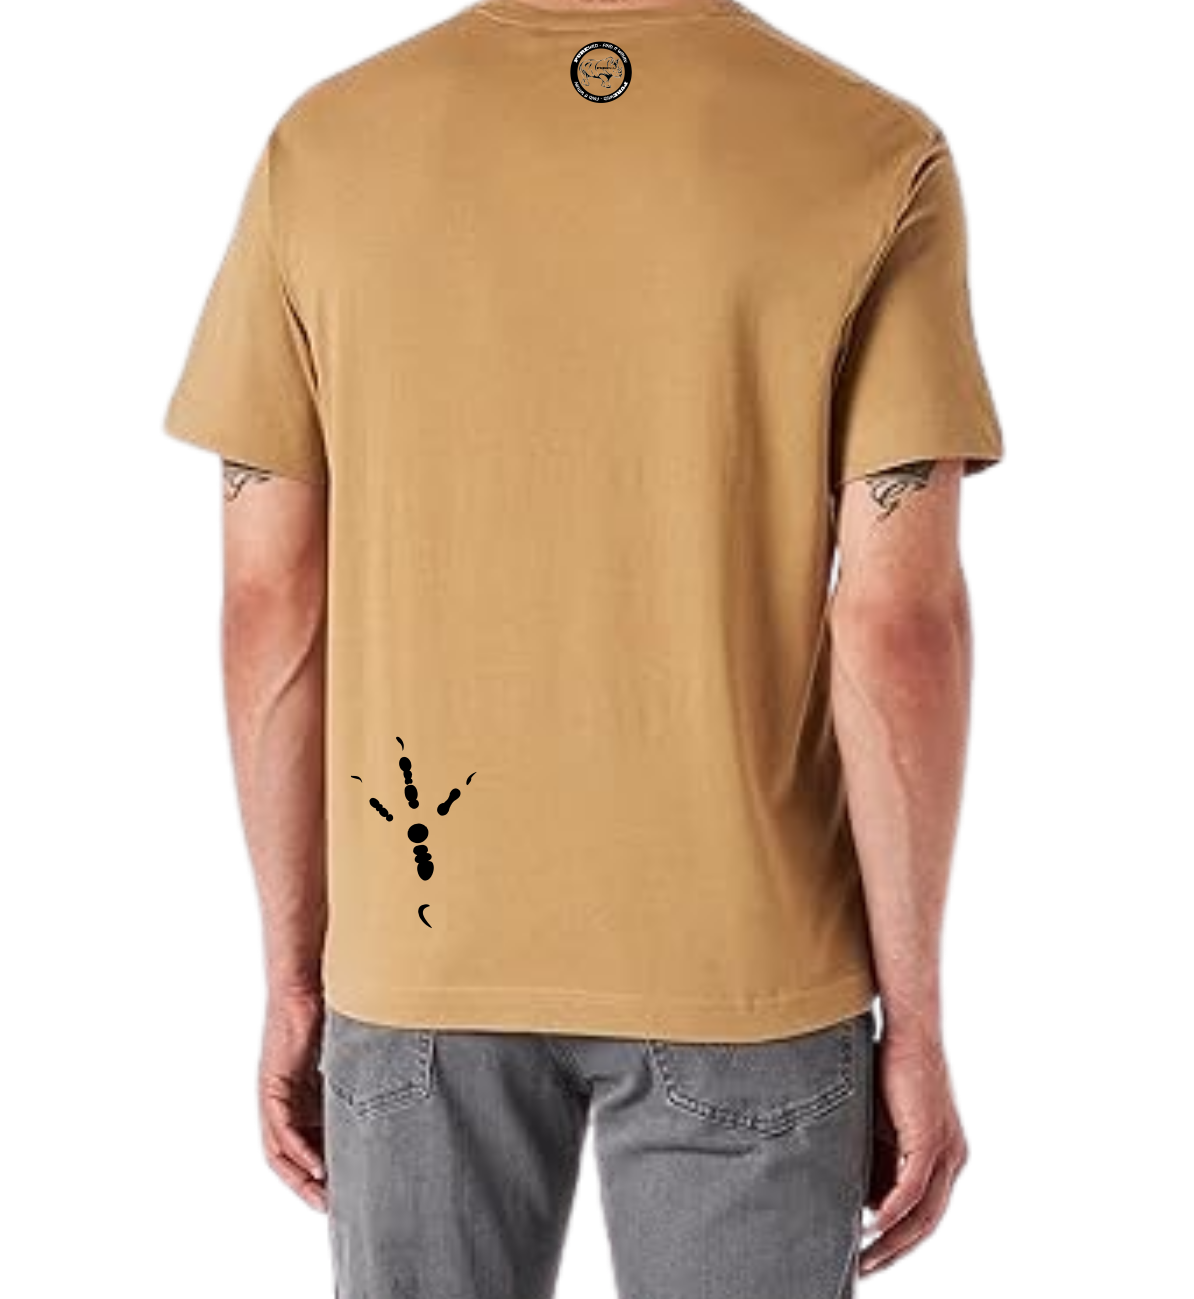 Martial Eagle T-Shirt For A Real Man